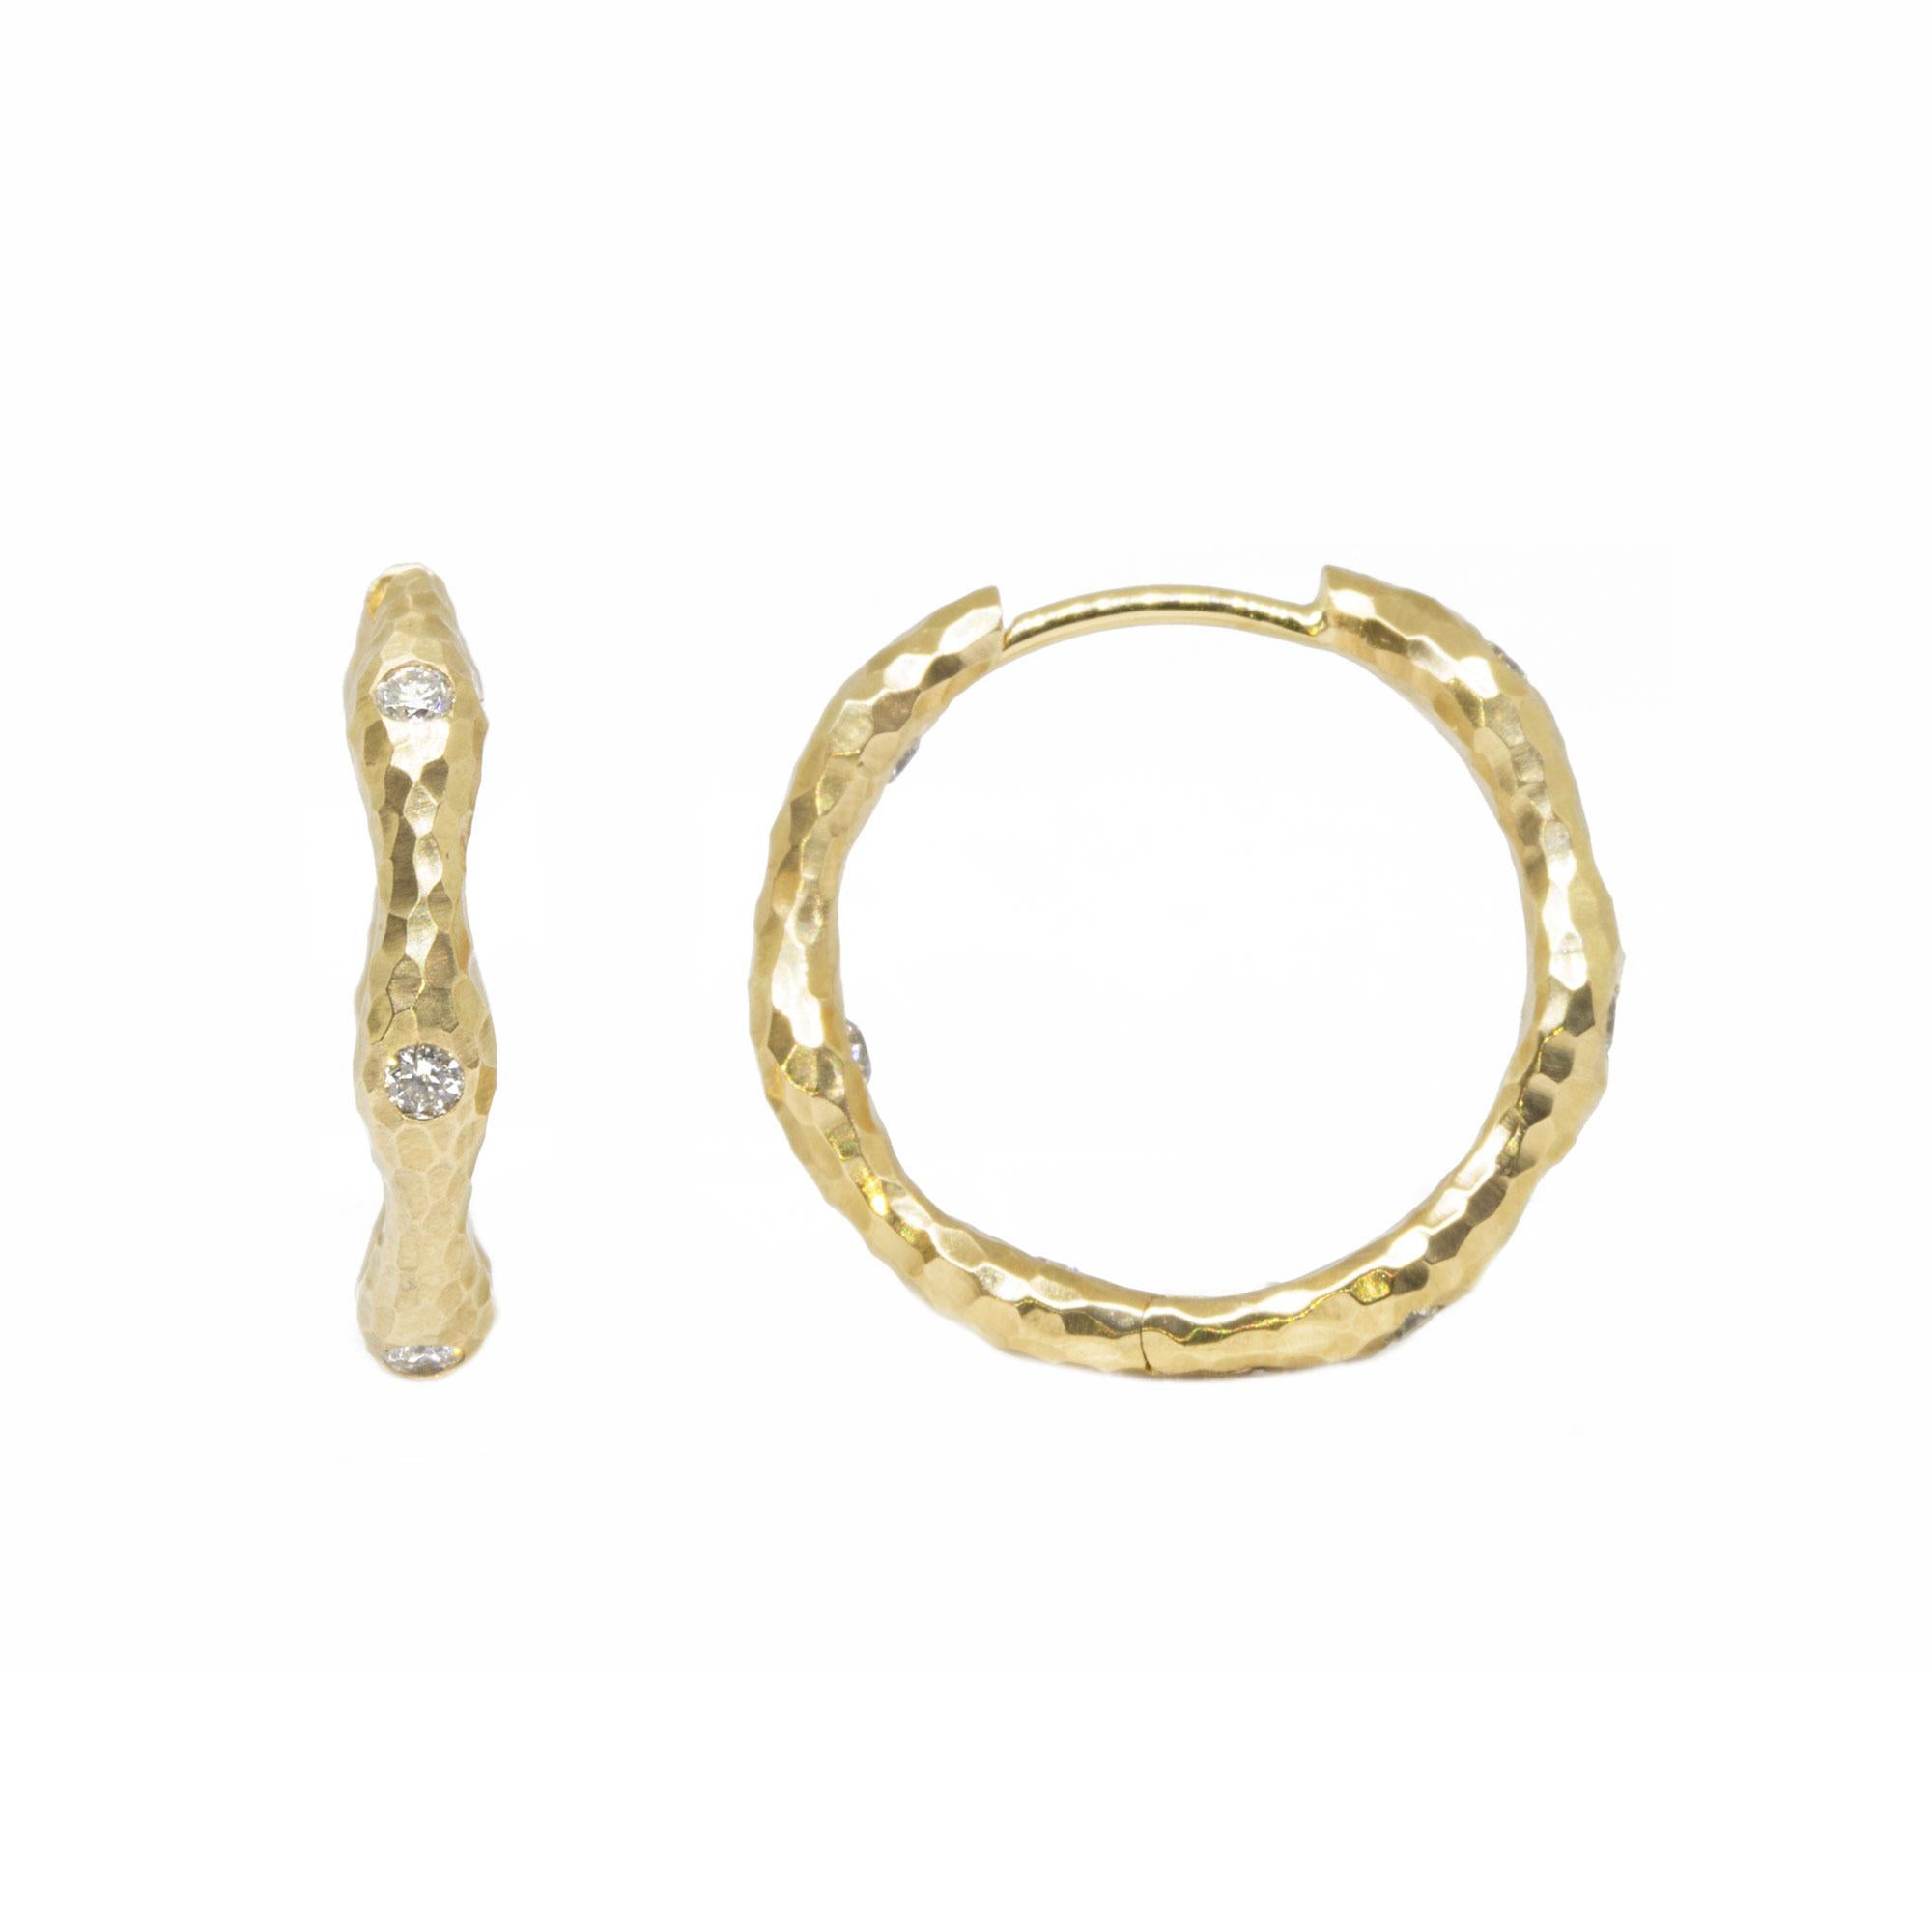 The diamond accented Gold Forged Hoop Earrings are made for dangling your favorite Charms (or a few). Or wear them on their own for an effortless, understated look. 

Metal: 14K Yellow Gold
Diamond carat: 0.45
Size: 22mm
Diamond size: 2mm

The